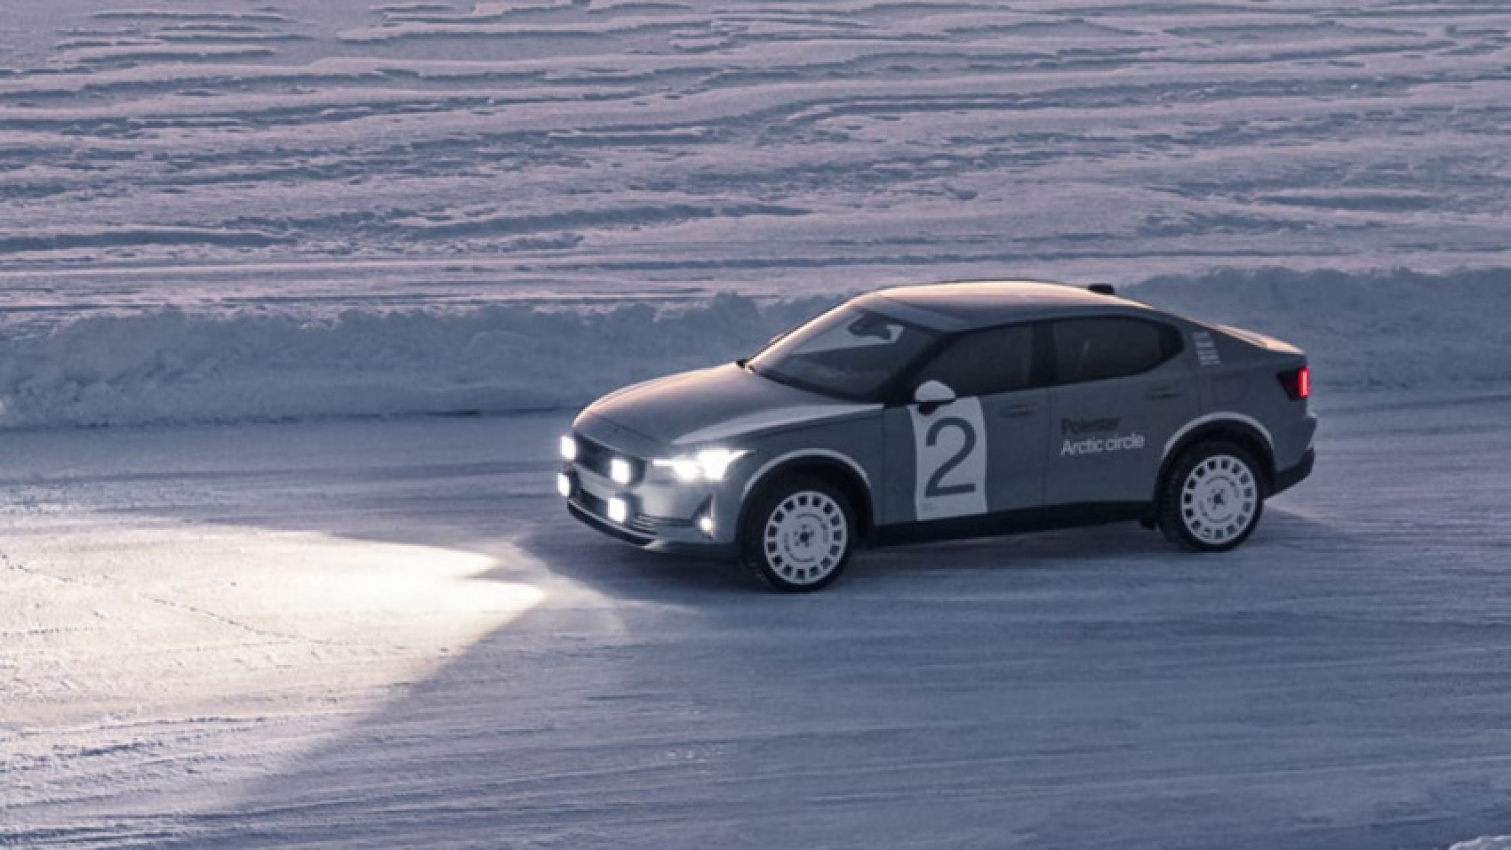 aftermarket, autos, cars, polestar, aftermarket, electric, green, performance, sedan, polestar 2 arctic circle concept aims for ultimate snow performance